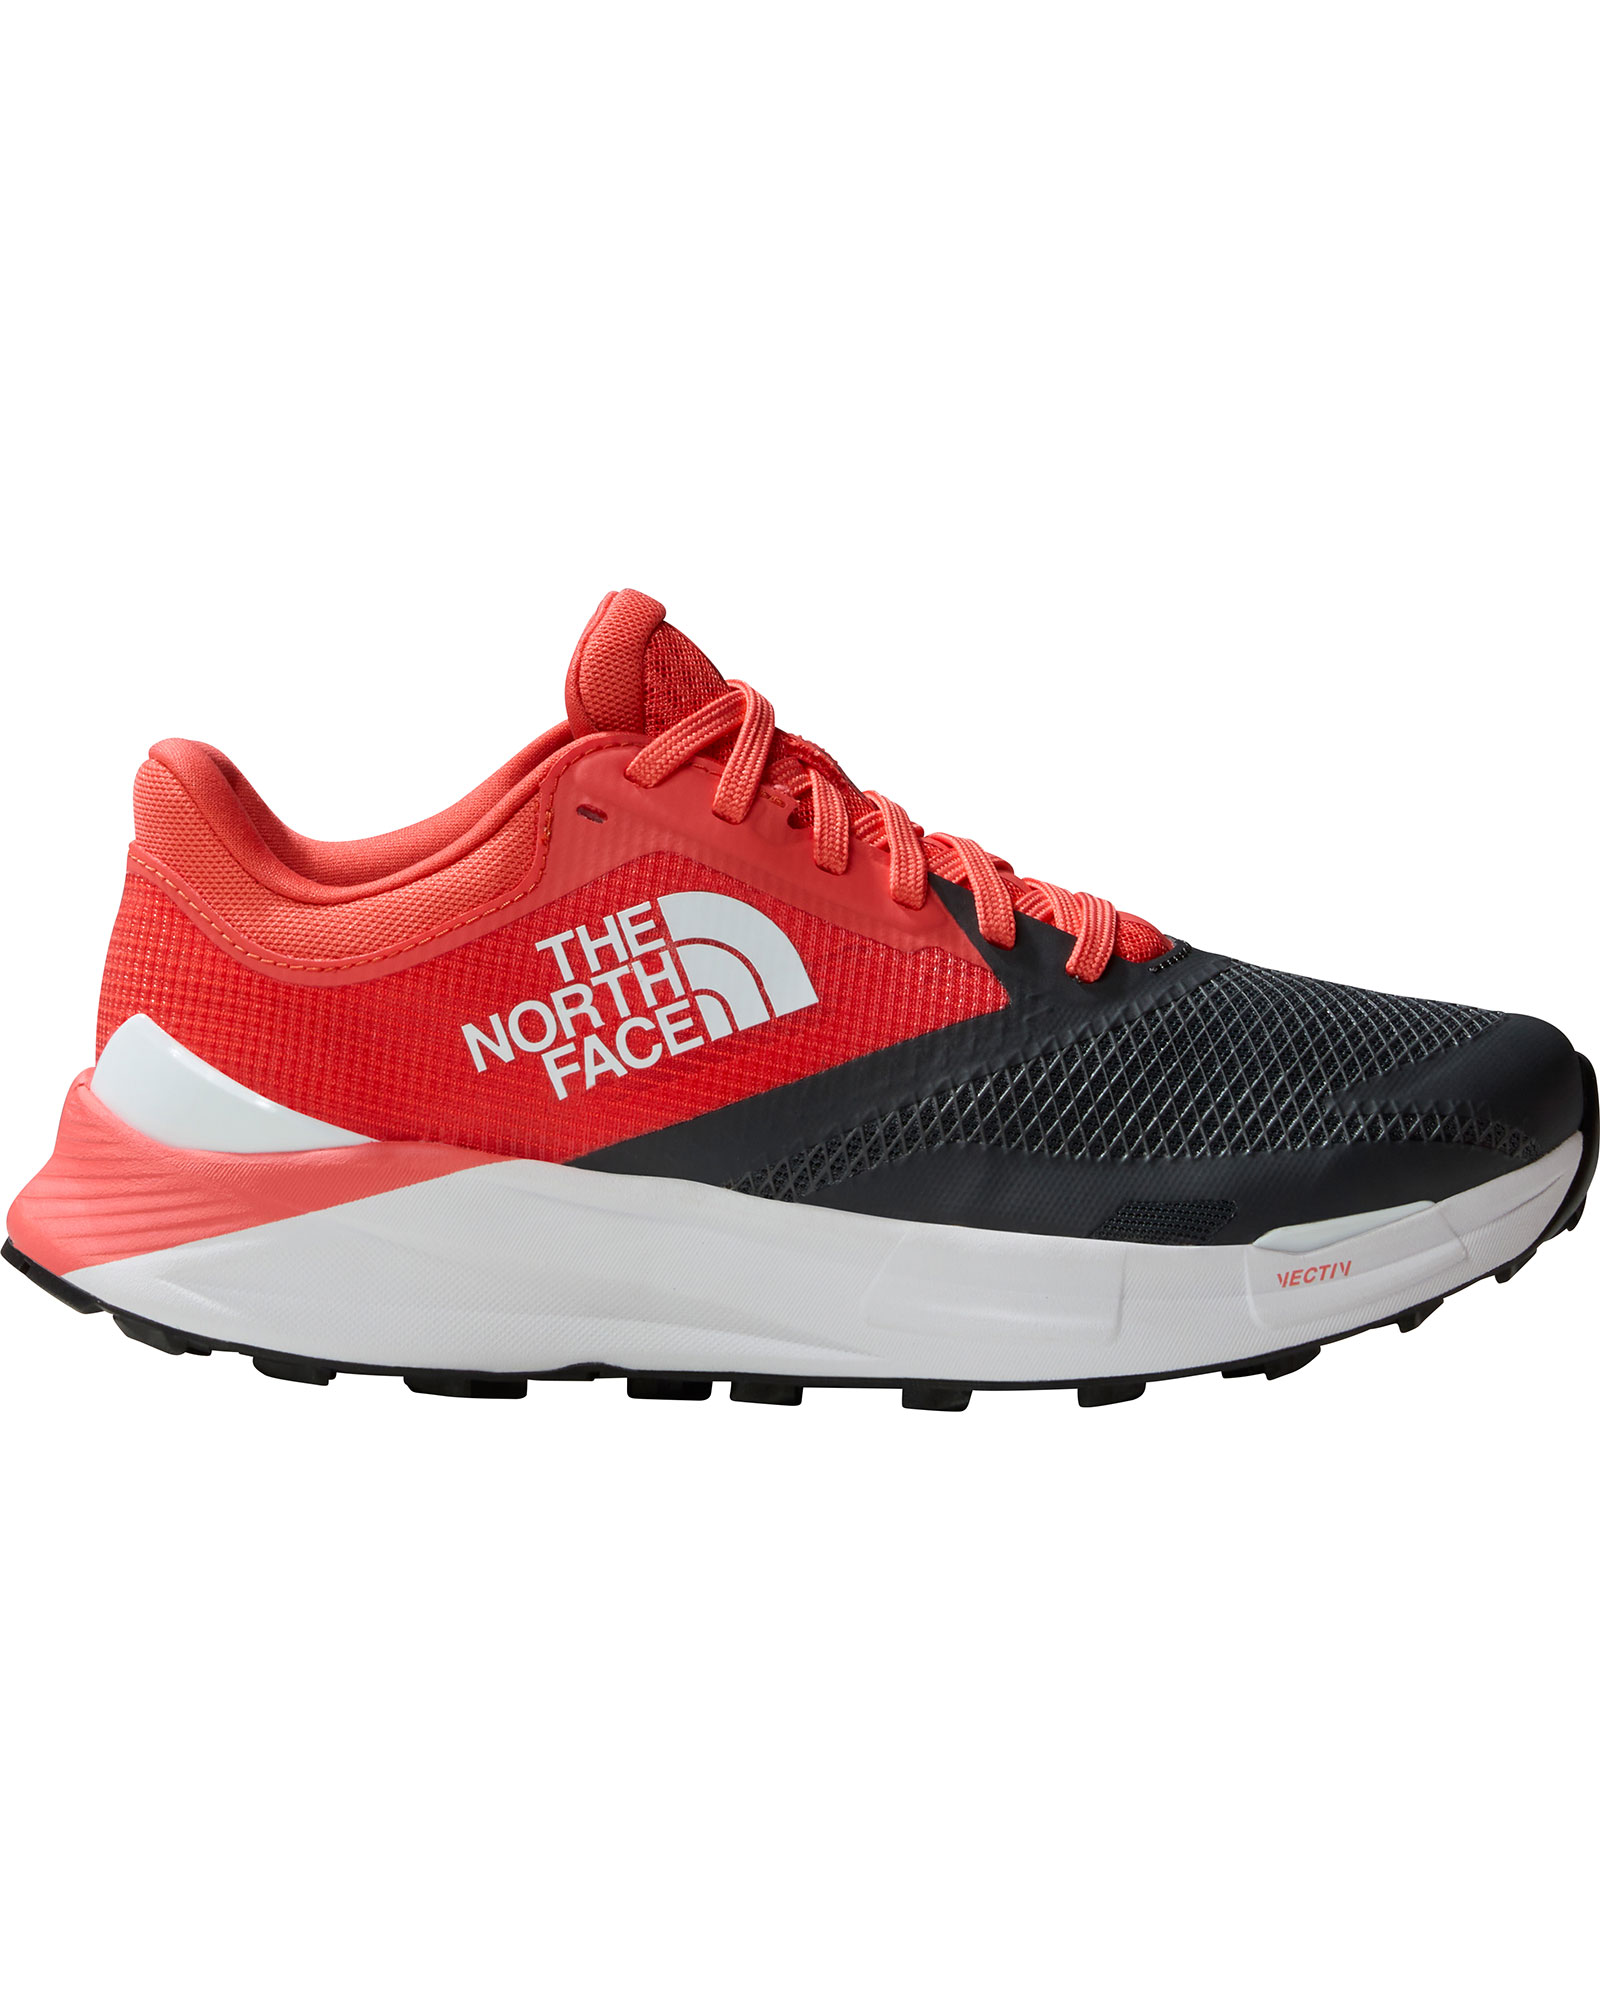 The North Face Women's Vectiv Enduris 3 Trail Running Shoes